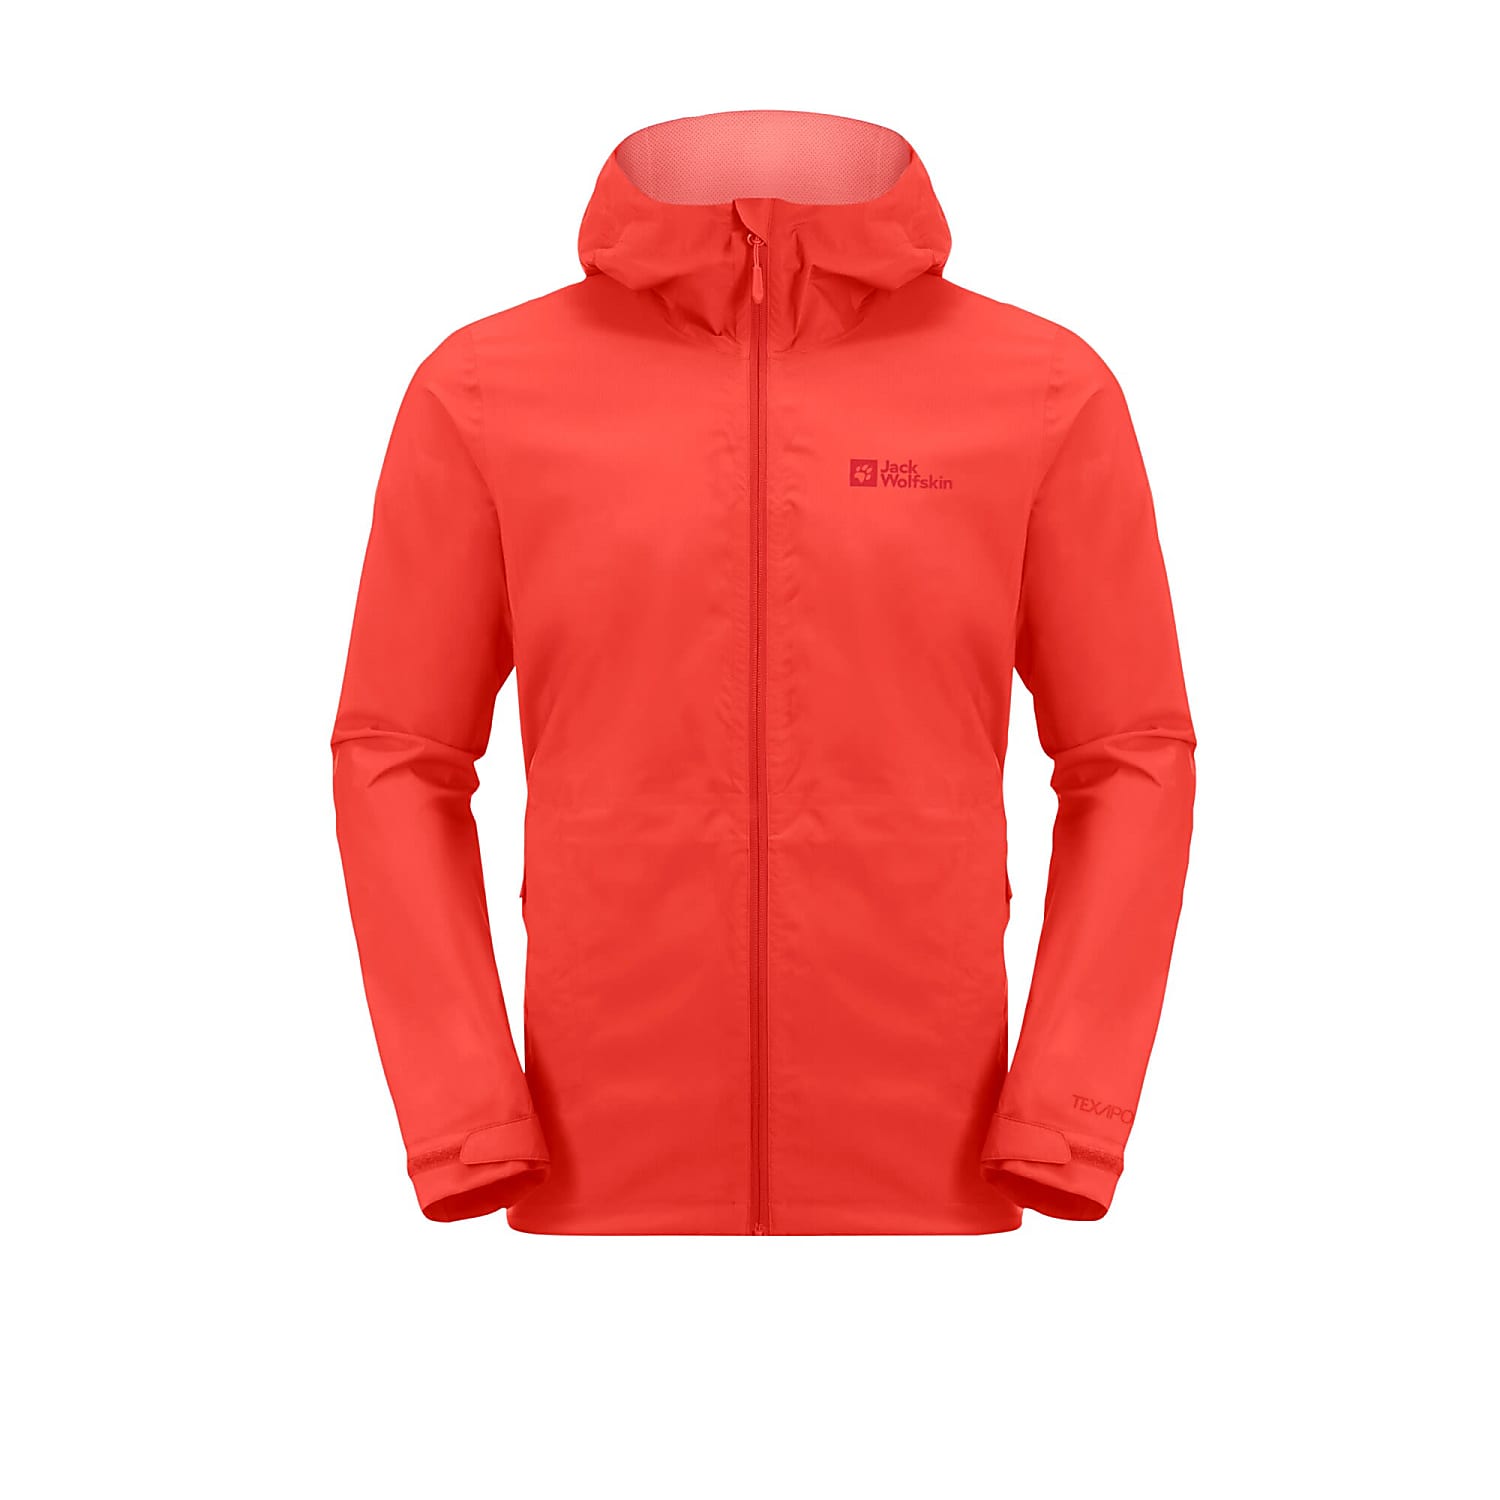 Wolfskin cheap - 2.5L Fast Jack shipping M Strong ELSBERG Red JKT, and